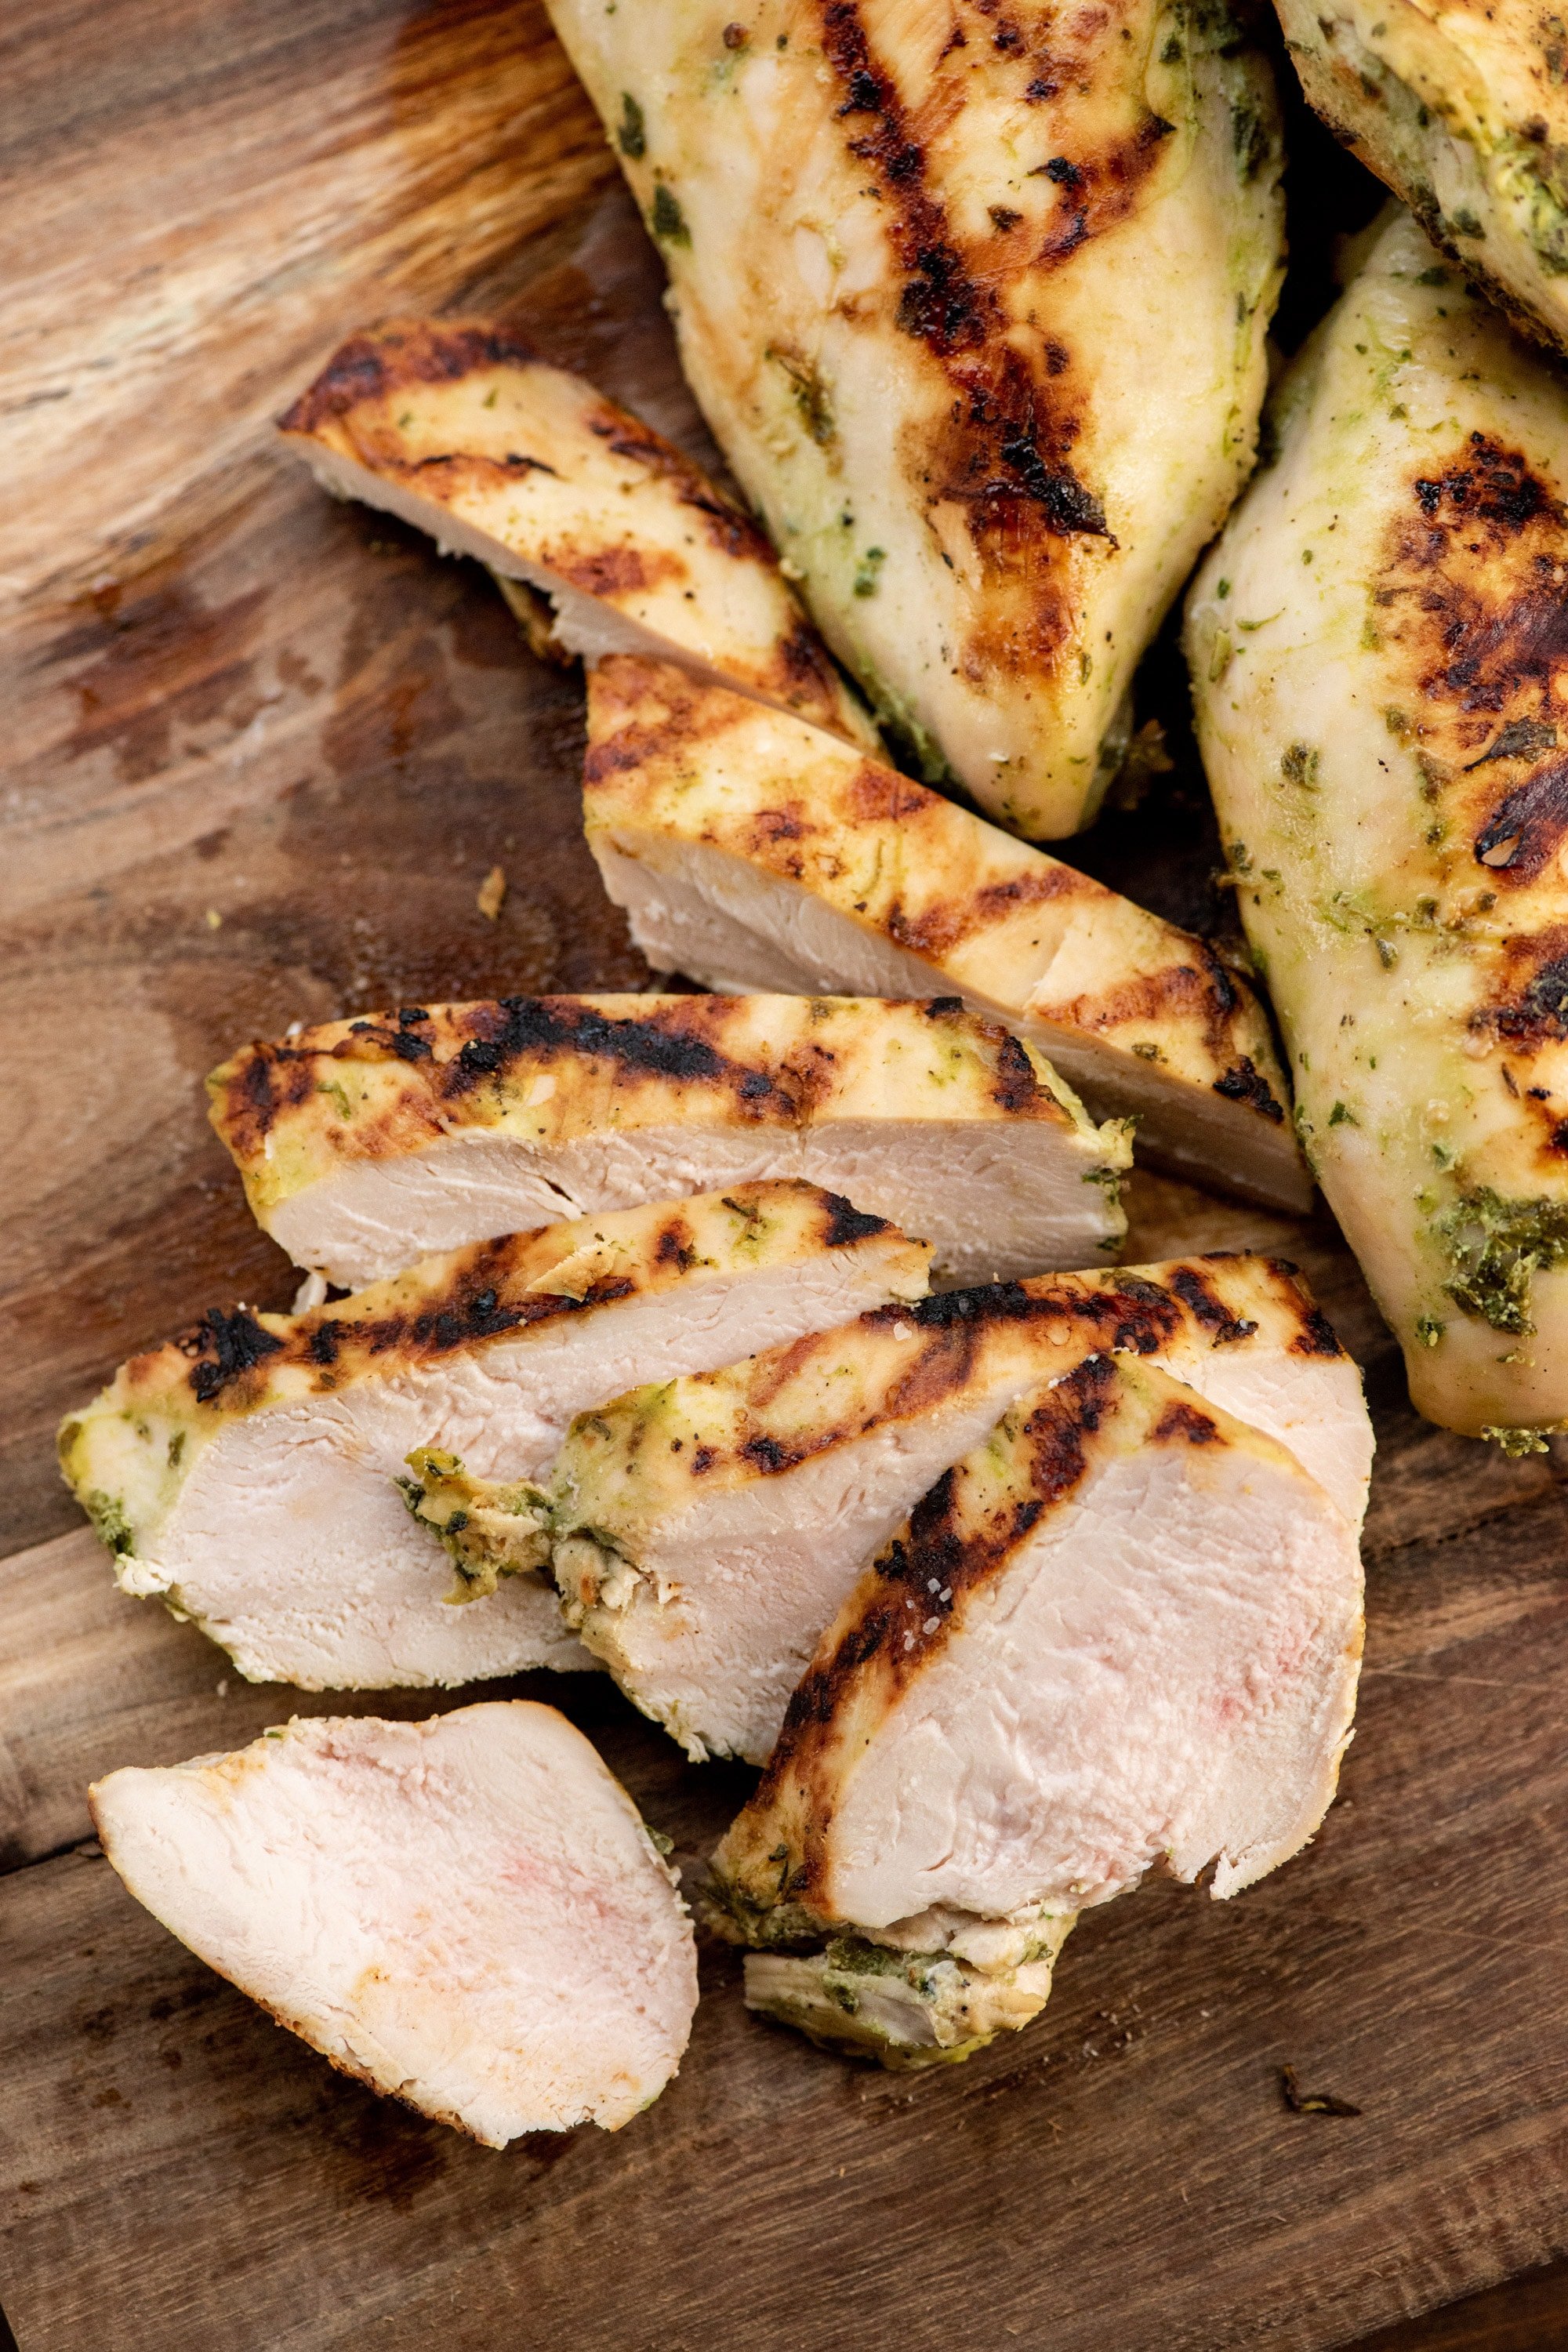 Slices of Grilled Chicken Breasts with Lime, Roasted Garlic and Fresh Herb Marinade.